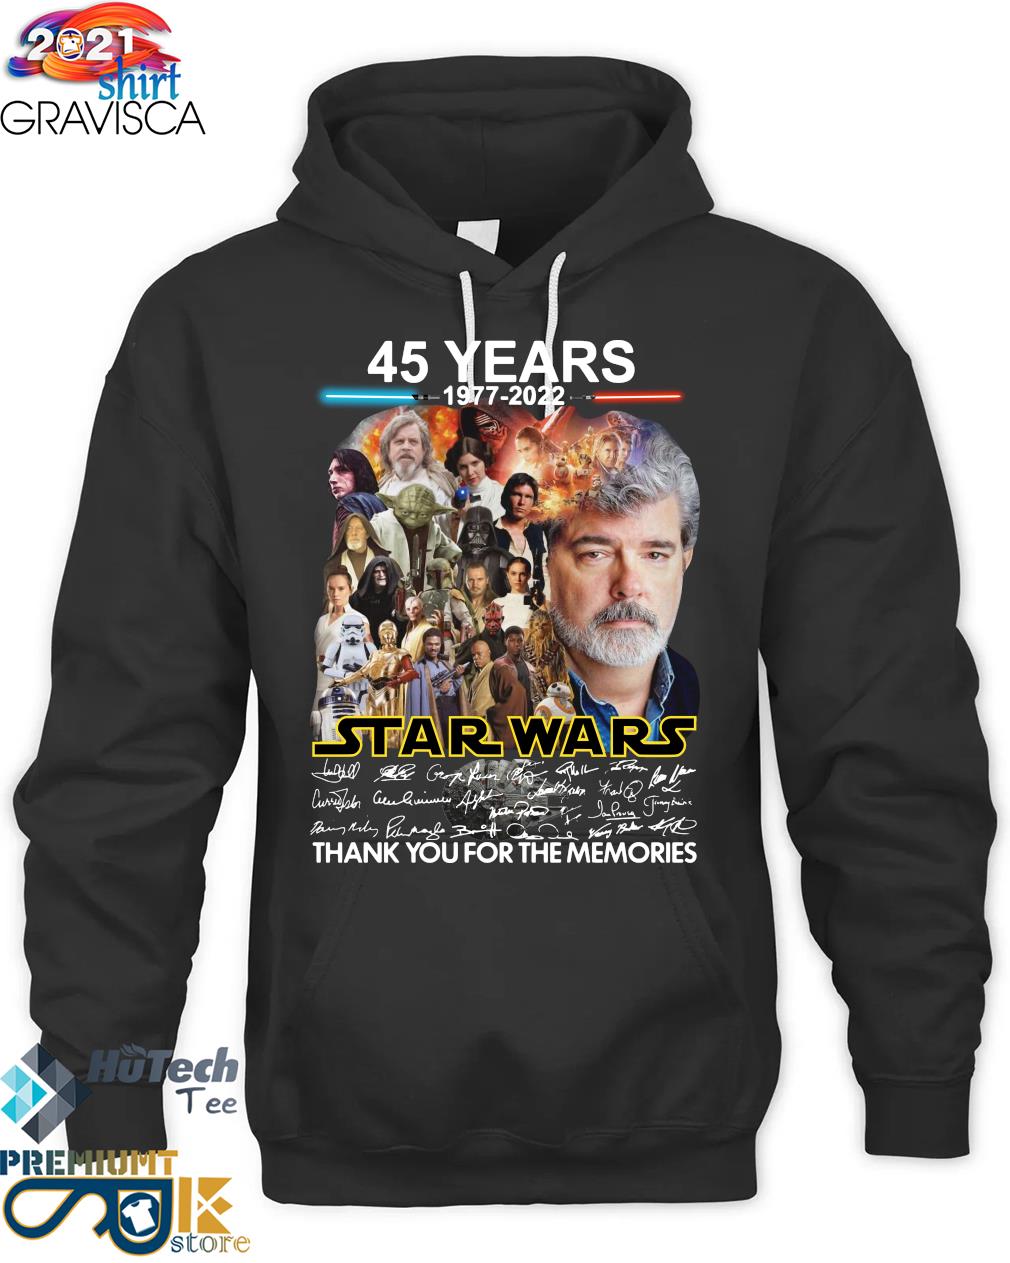 45 Years 1977 2022 Star Wars signatures thank you for the memories s Hoodie